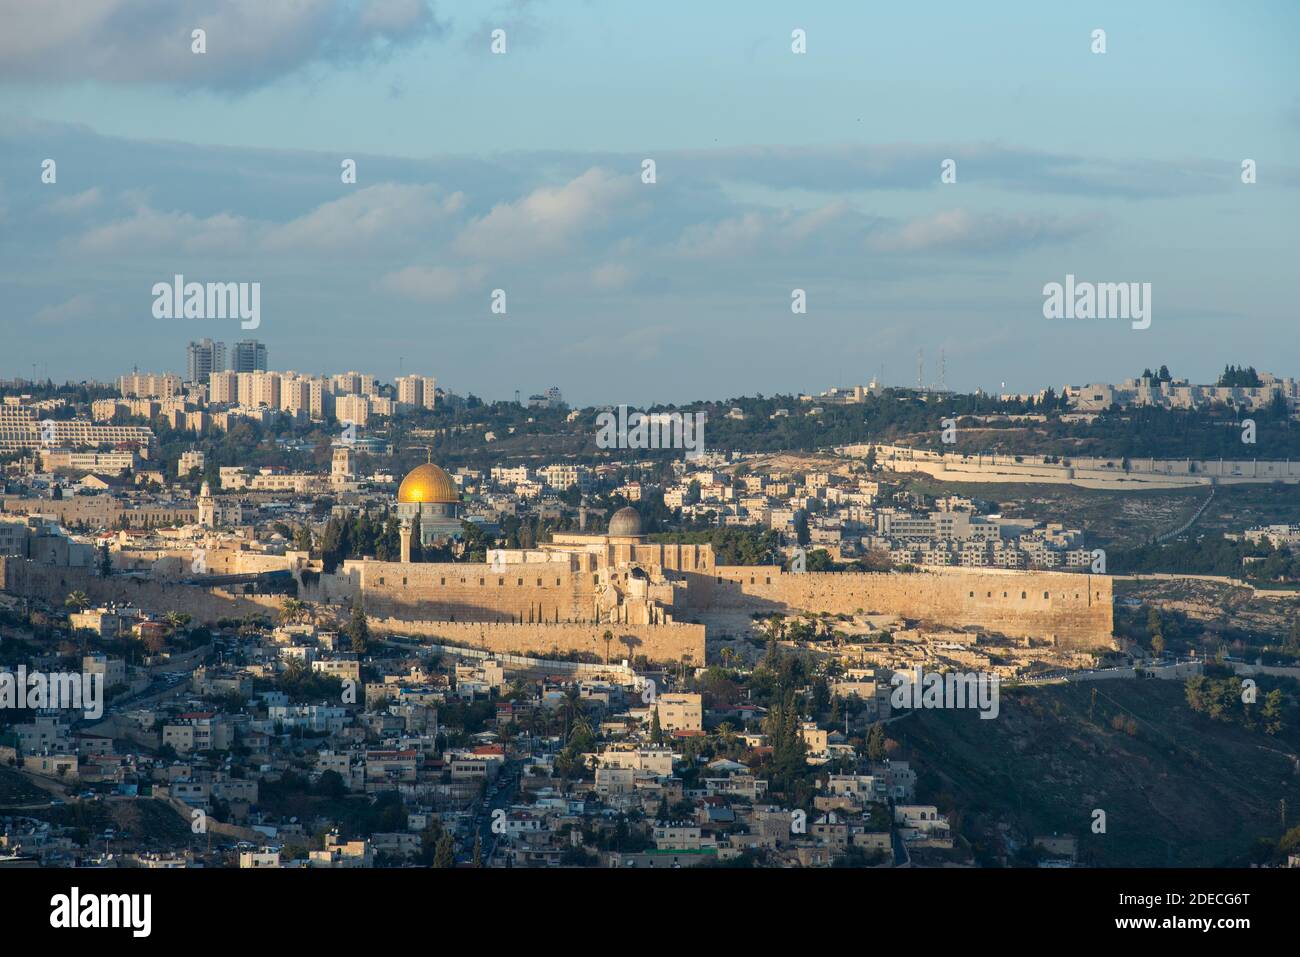 A view of the Old City of Jerusalem. Stock Photo